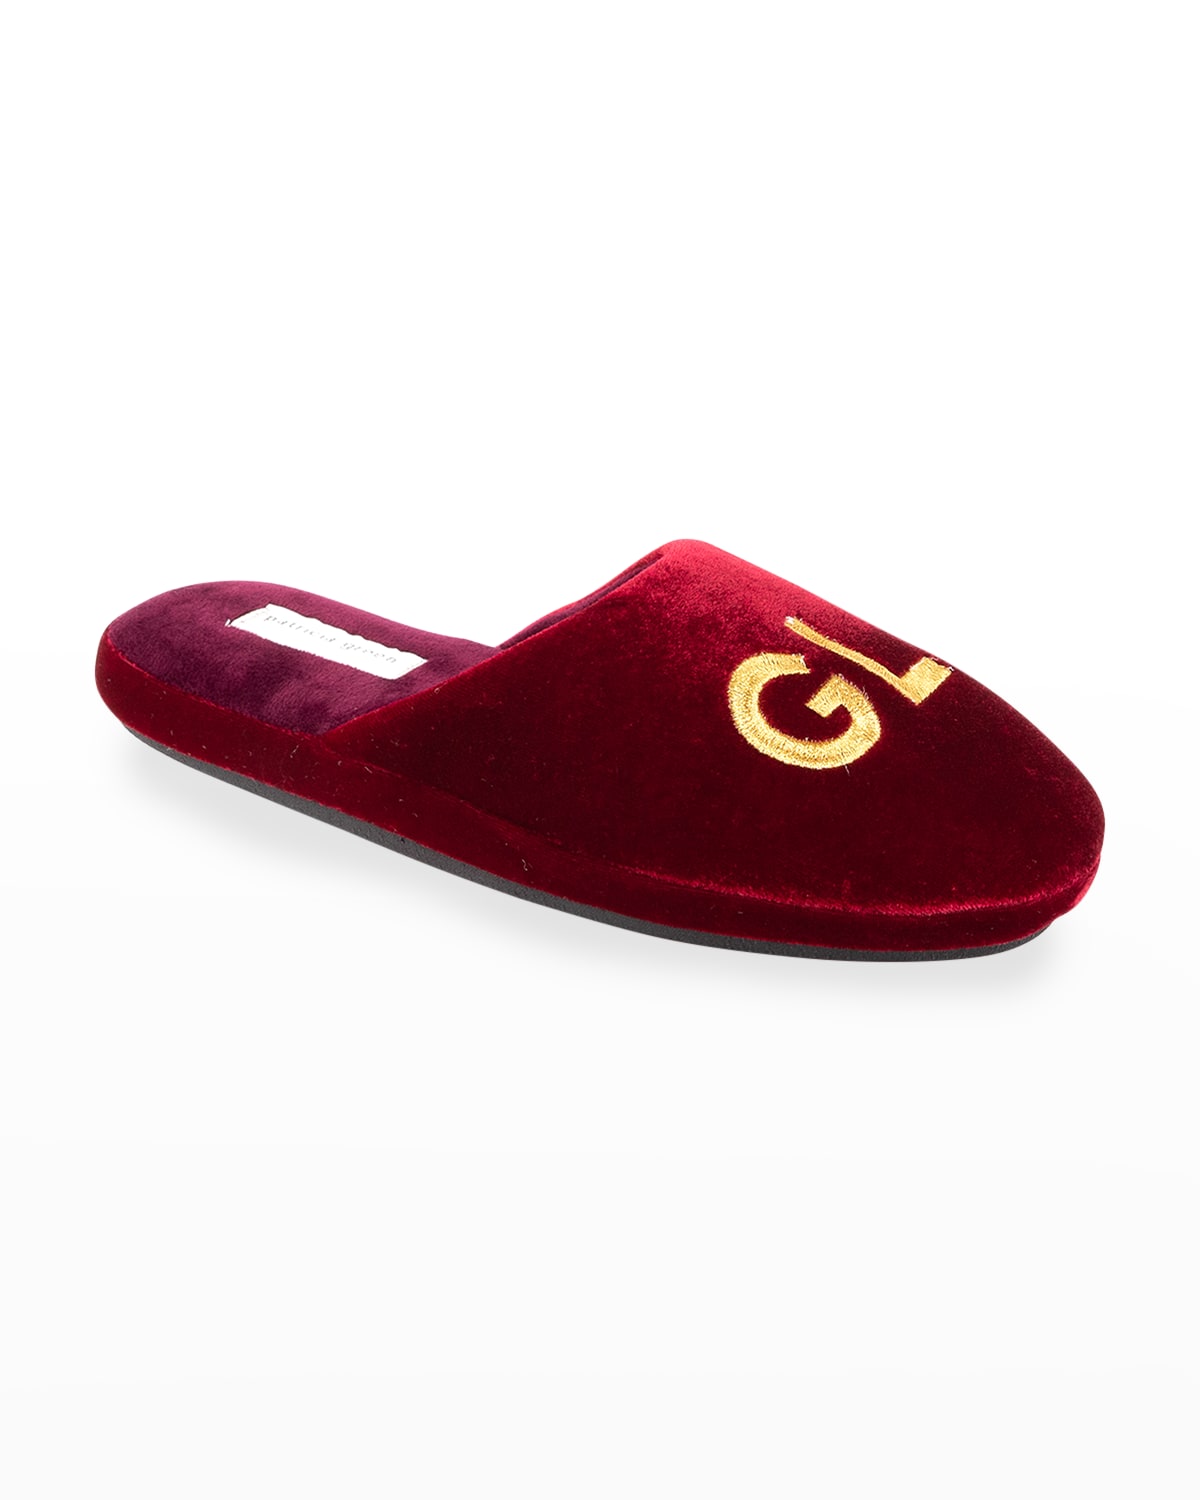 PATRICIA GREEN GLAM EMBROIDERED SLIPPERS,PROD238850272